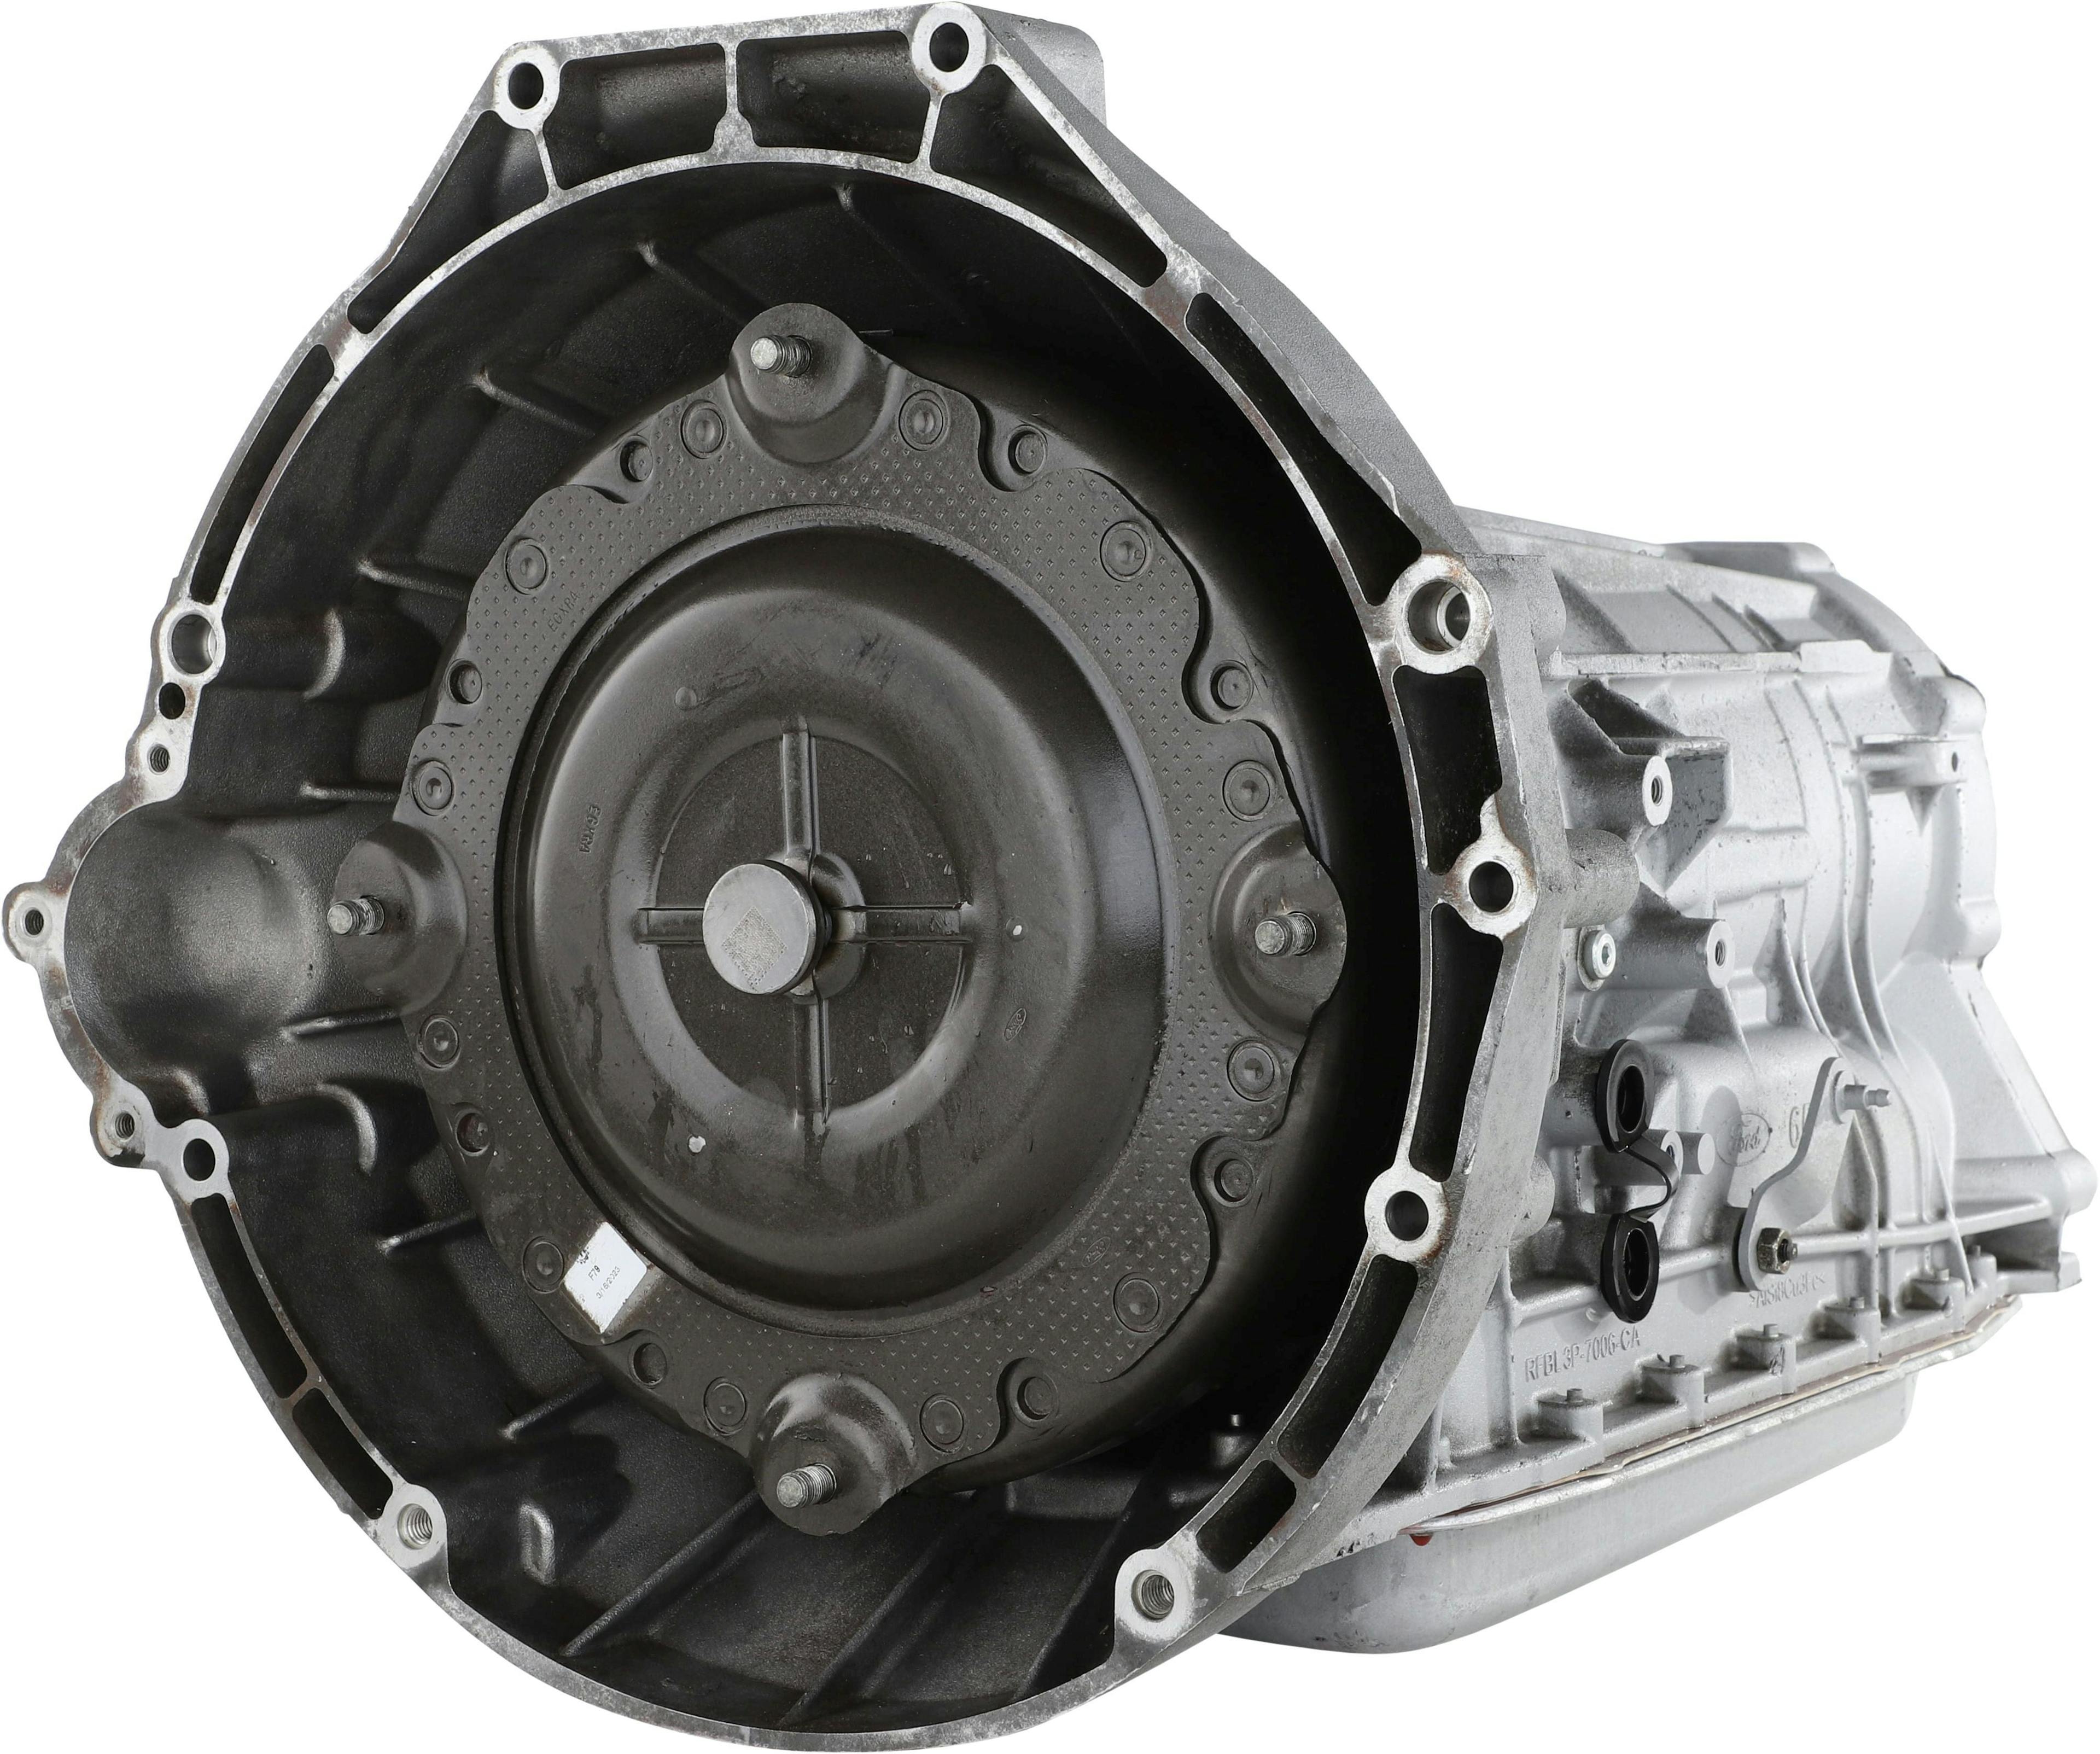 Automatic Transmission for 2012-2014 Ford Expedition/Lincoln Navigator 4WD with 5.4L V8 Engine